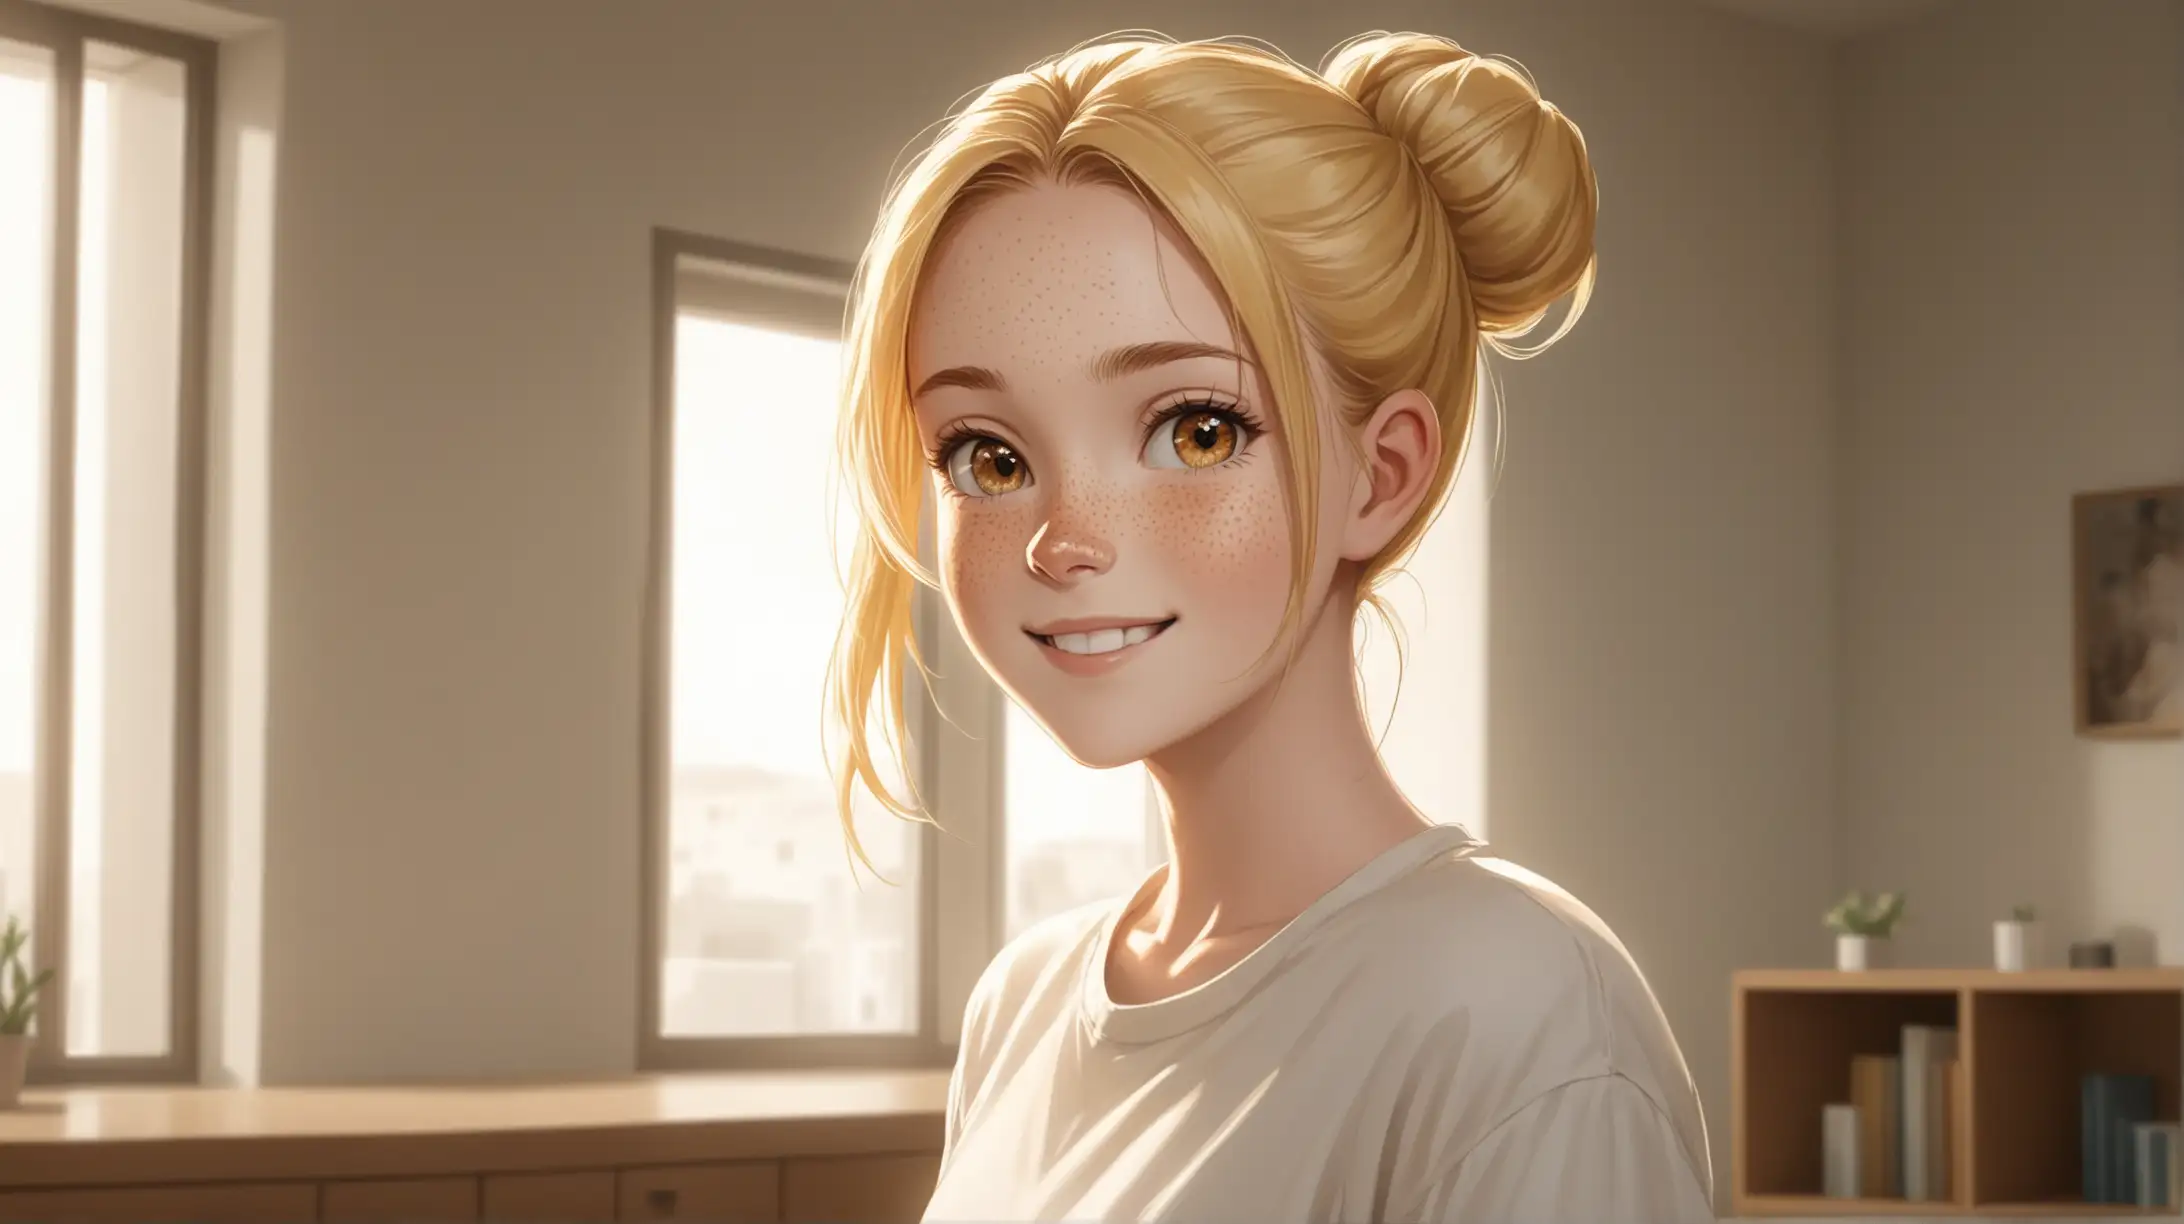 Draw a young woman, long blonde hair in a bun, gold eyes, freckles, medium figure,
shorts and a shirt, smiling, high quality, long shot, indoors, natural lighting